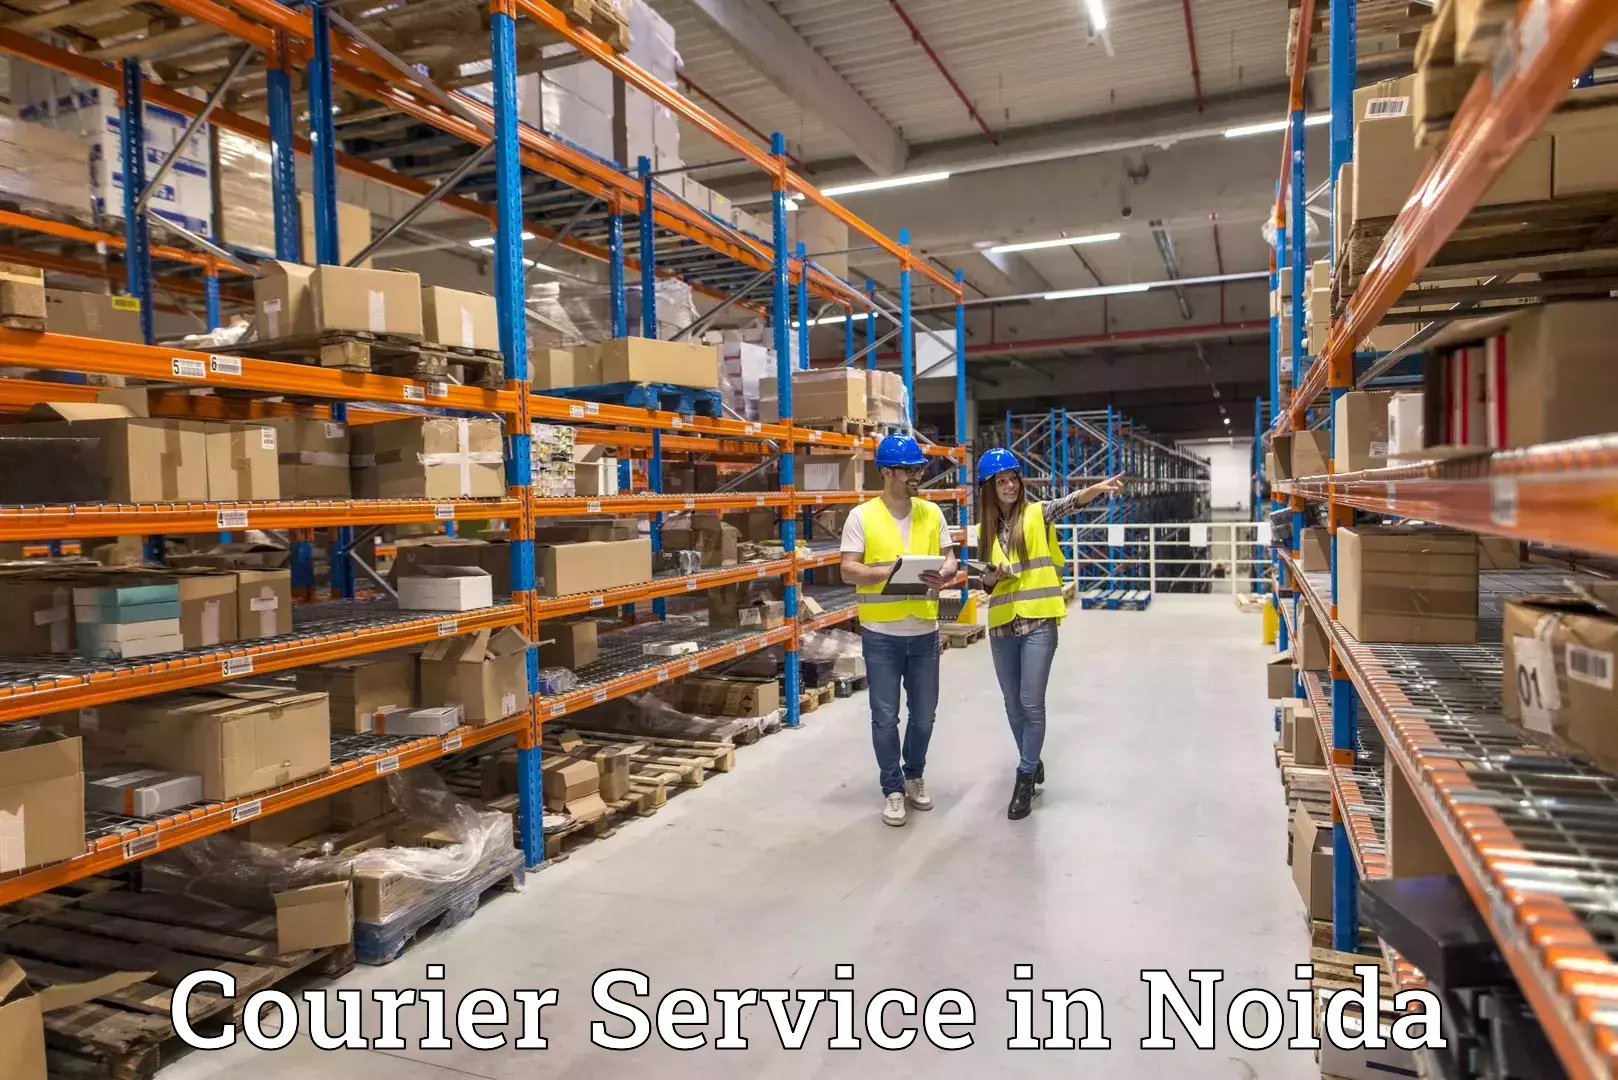 Customer-friendly courier services in Noida